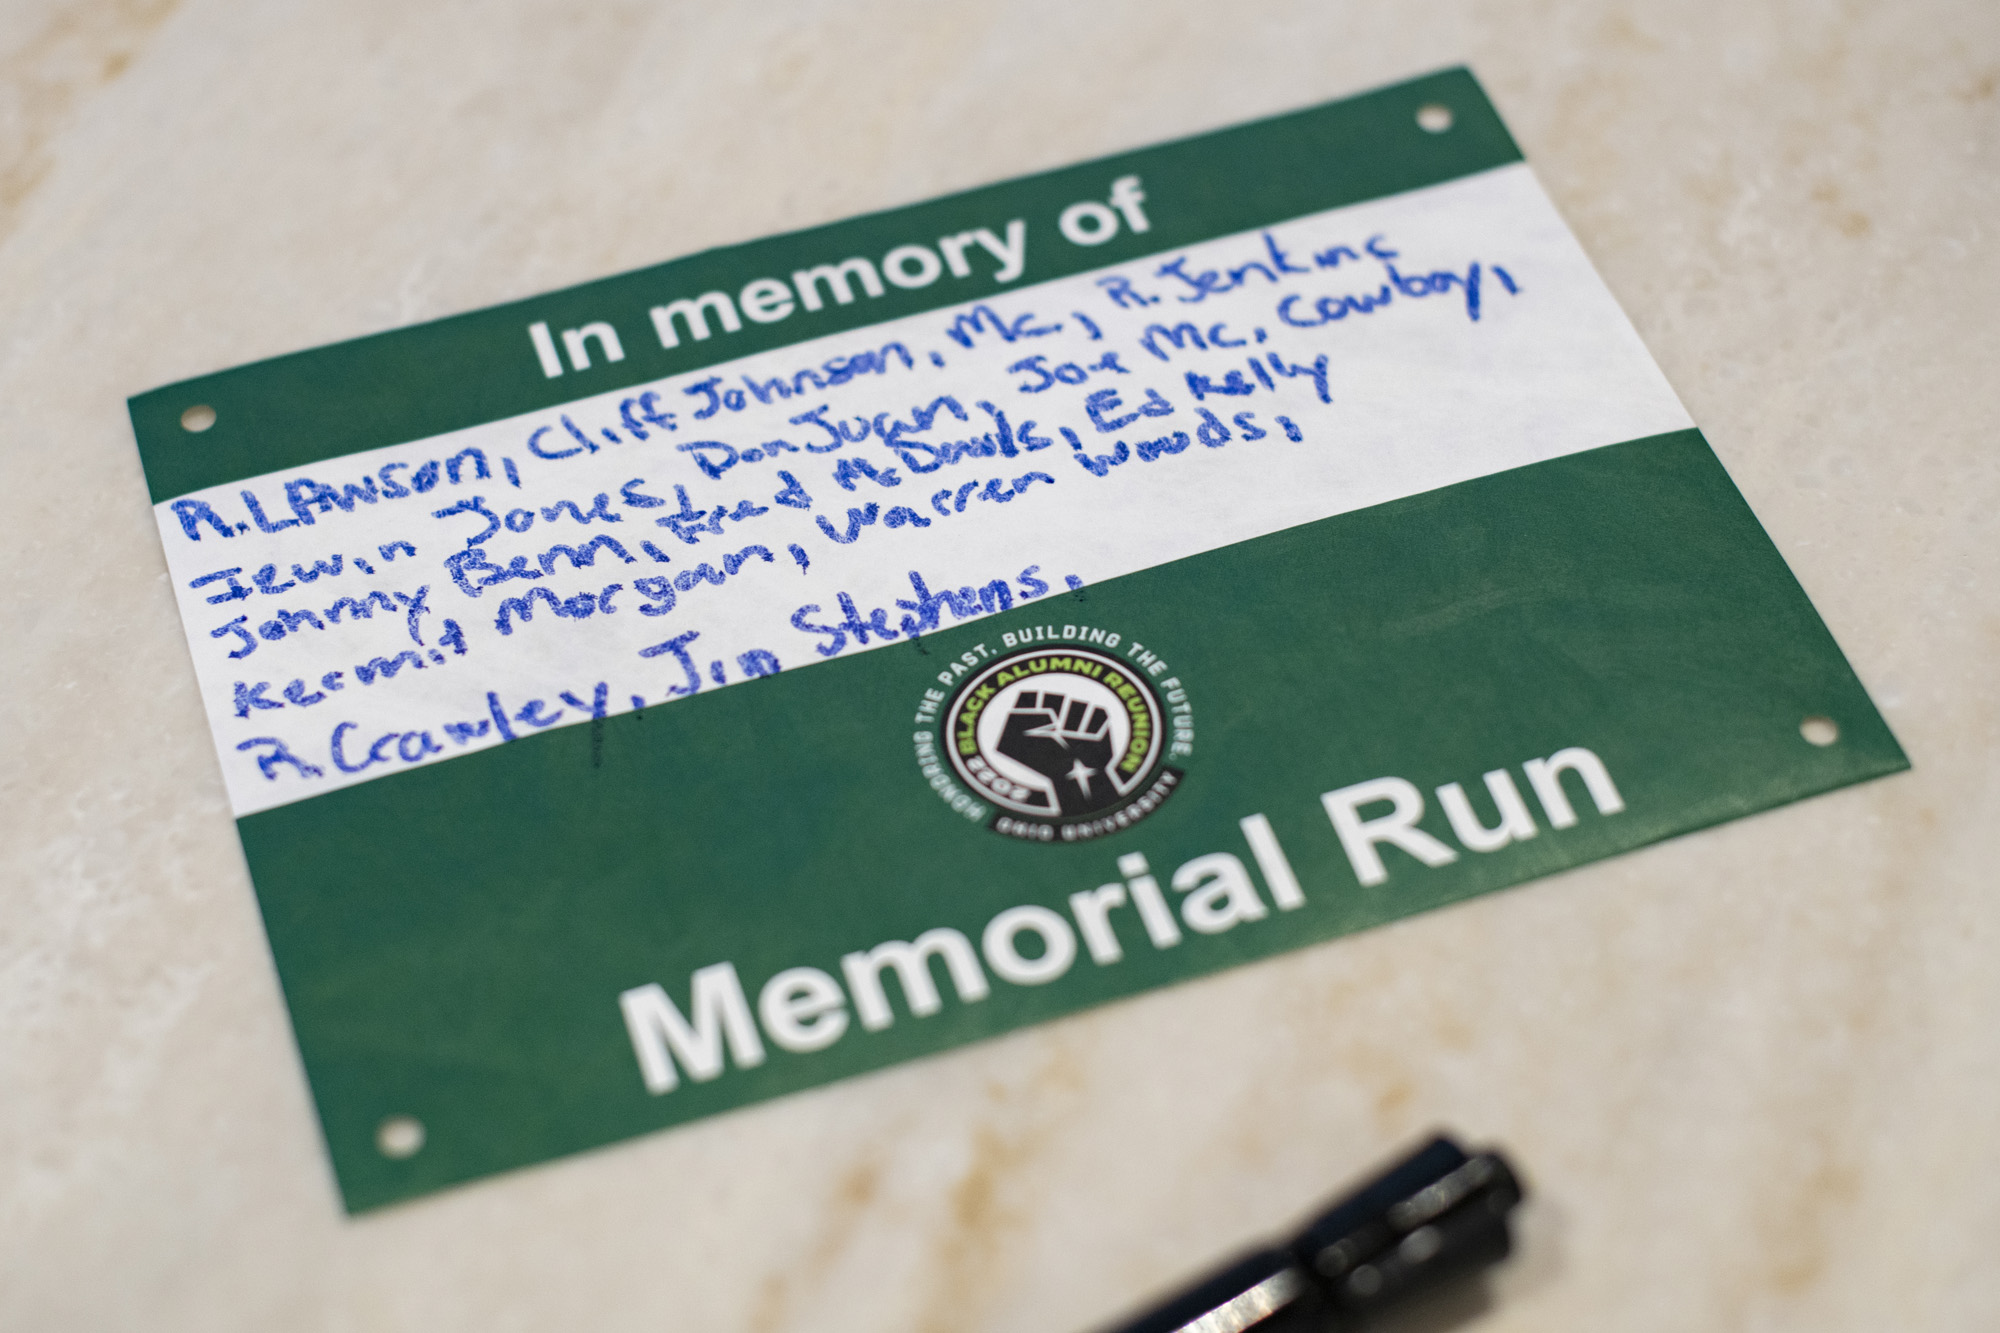 Saturday’s Black Alumni Reunion festivities kicked off bright and early with the return of the BAR Memorial Run/Walk, a 5K event during which more than 100 participants paid tribute to those gone but not forgotten.